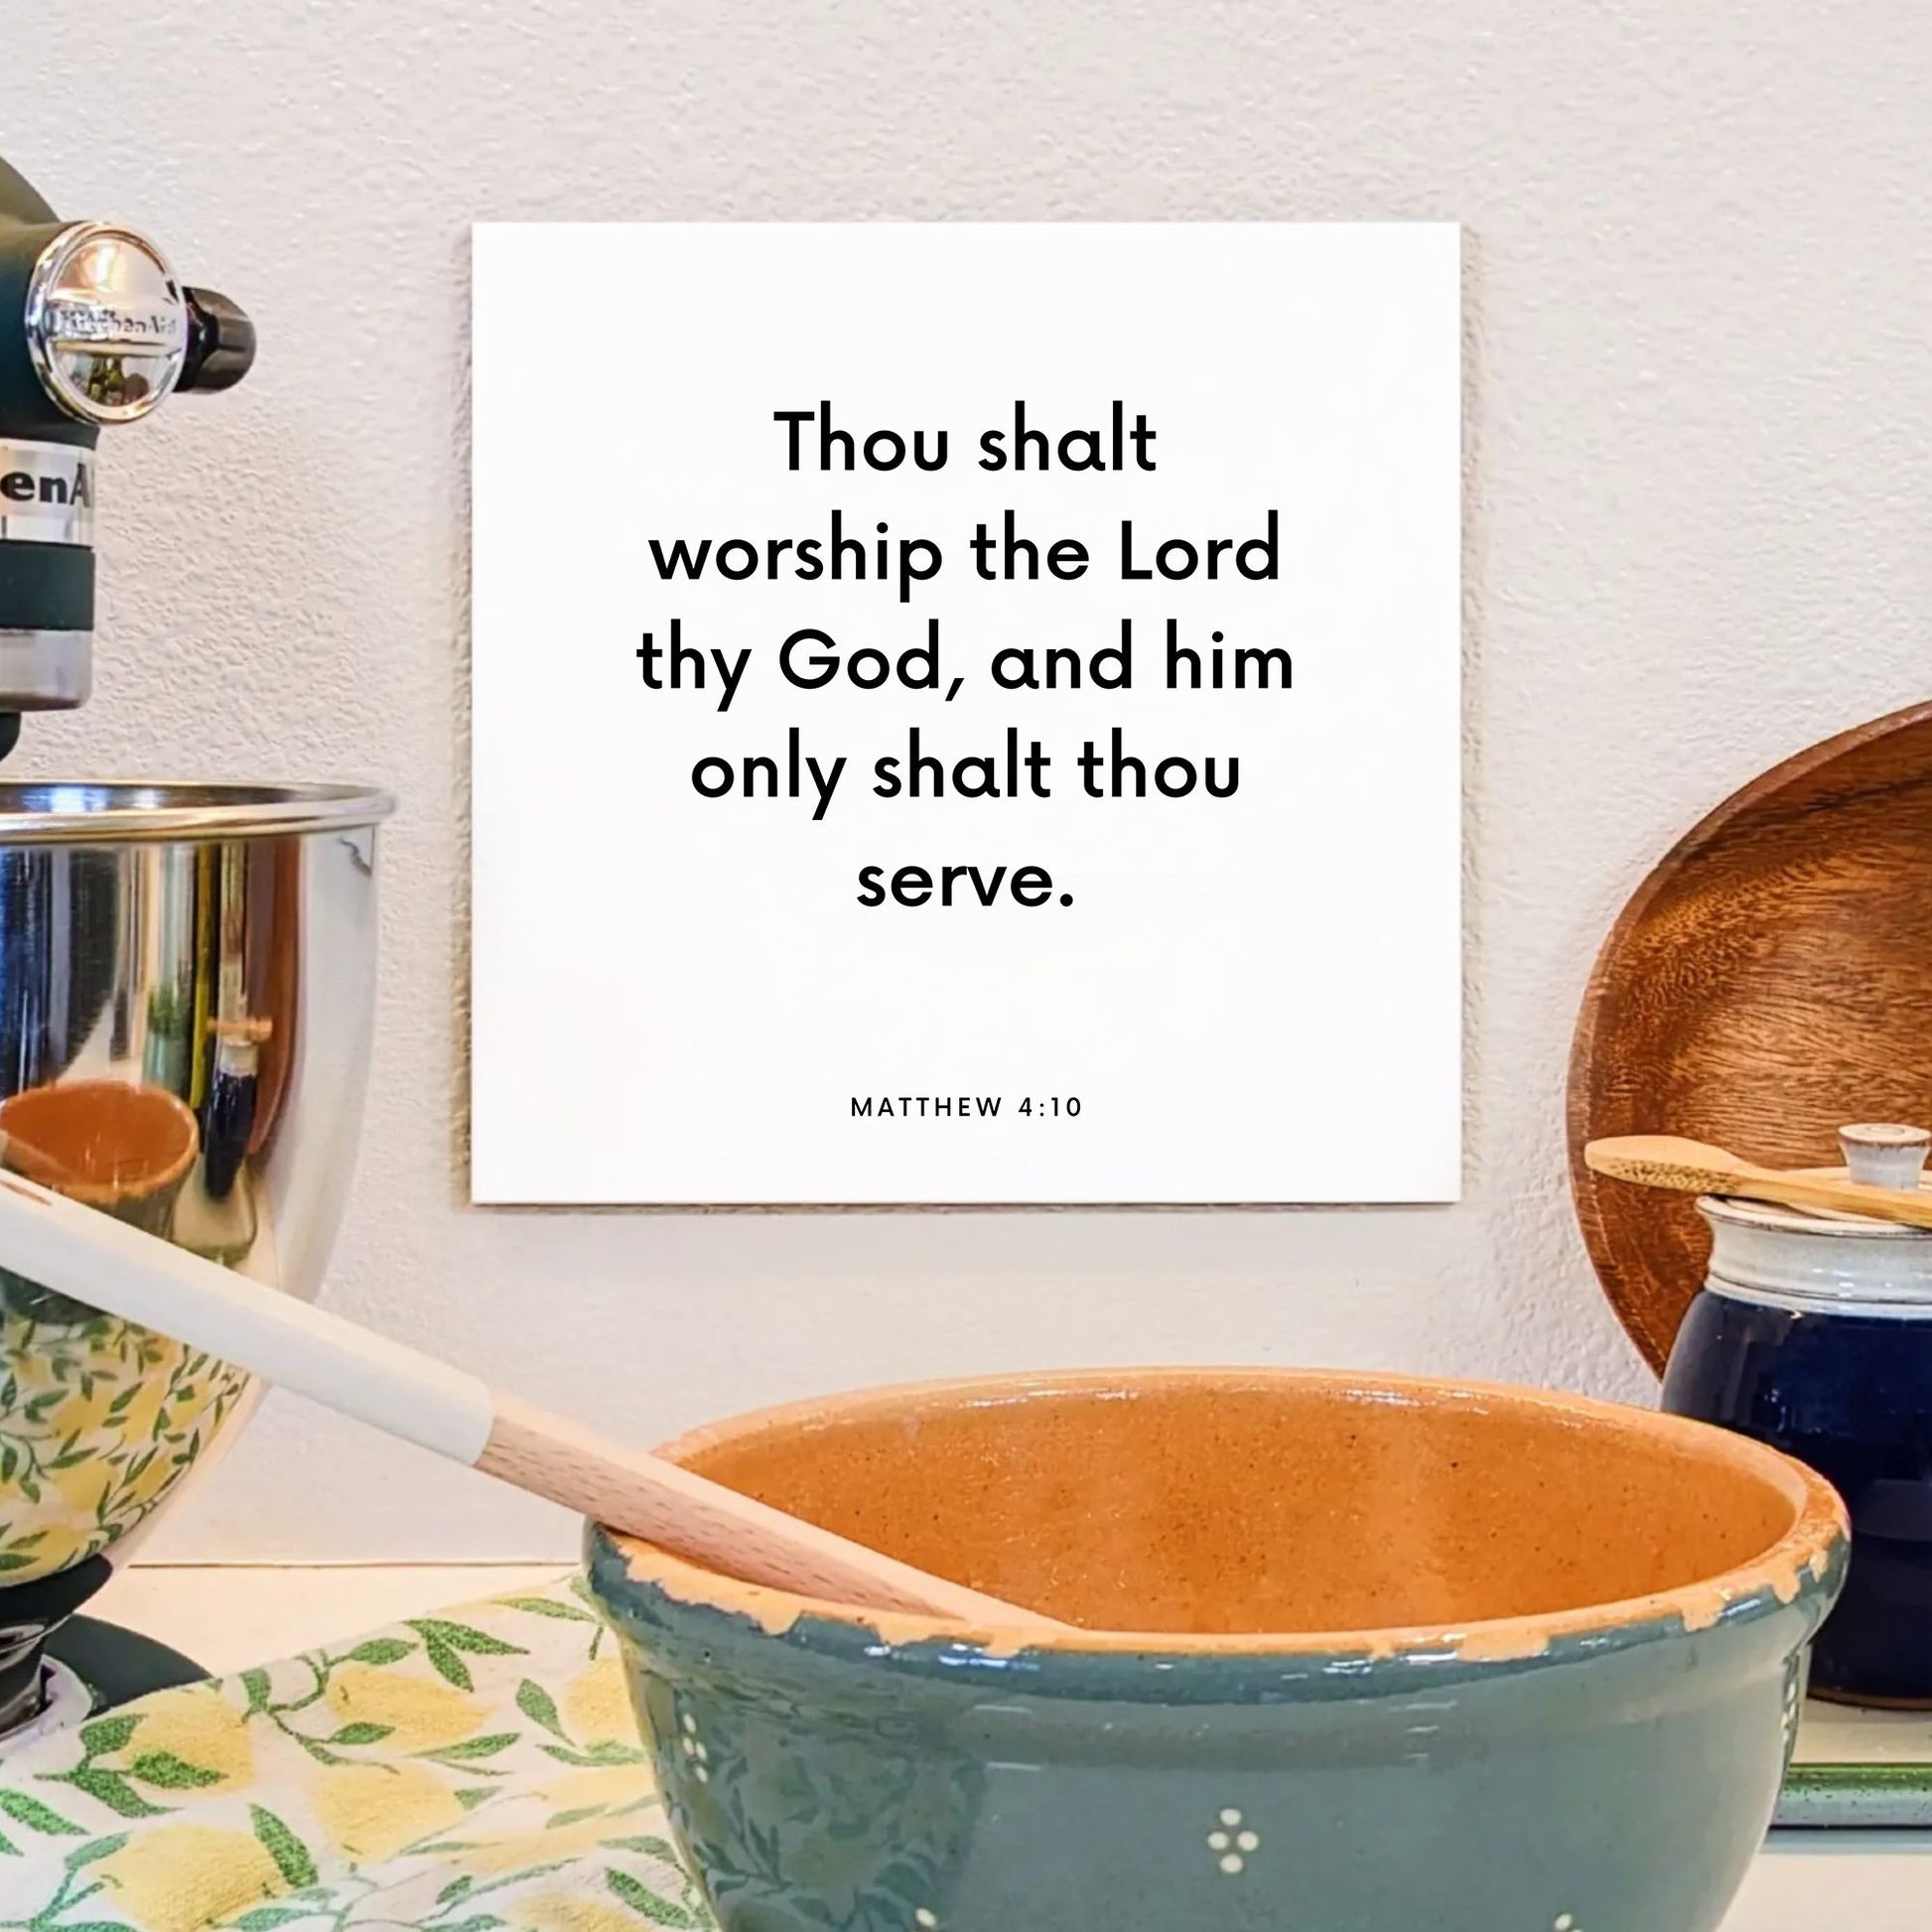 Kitchen mouting of the scripture tile for Matthew 4:10 - "Thou shalt worship the Lord thy God"